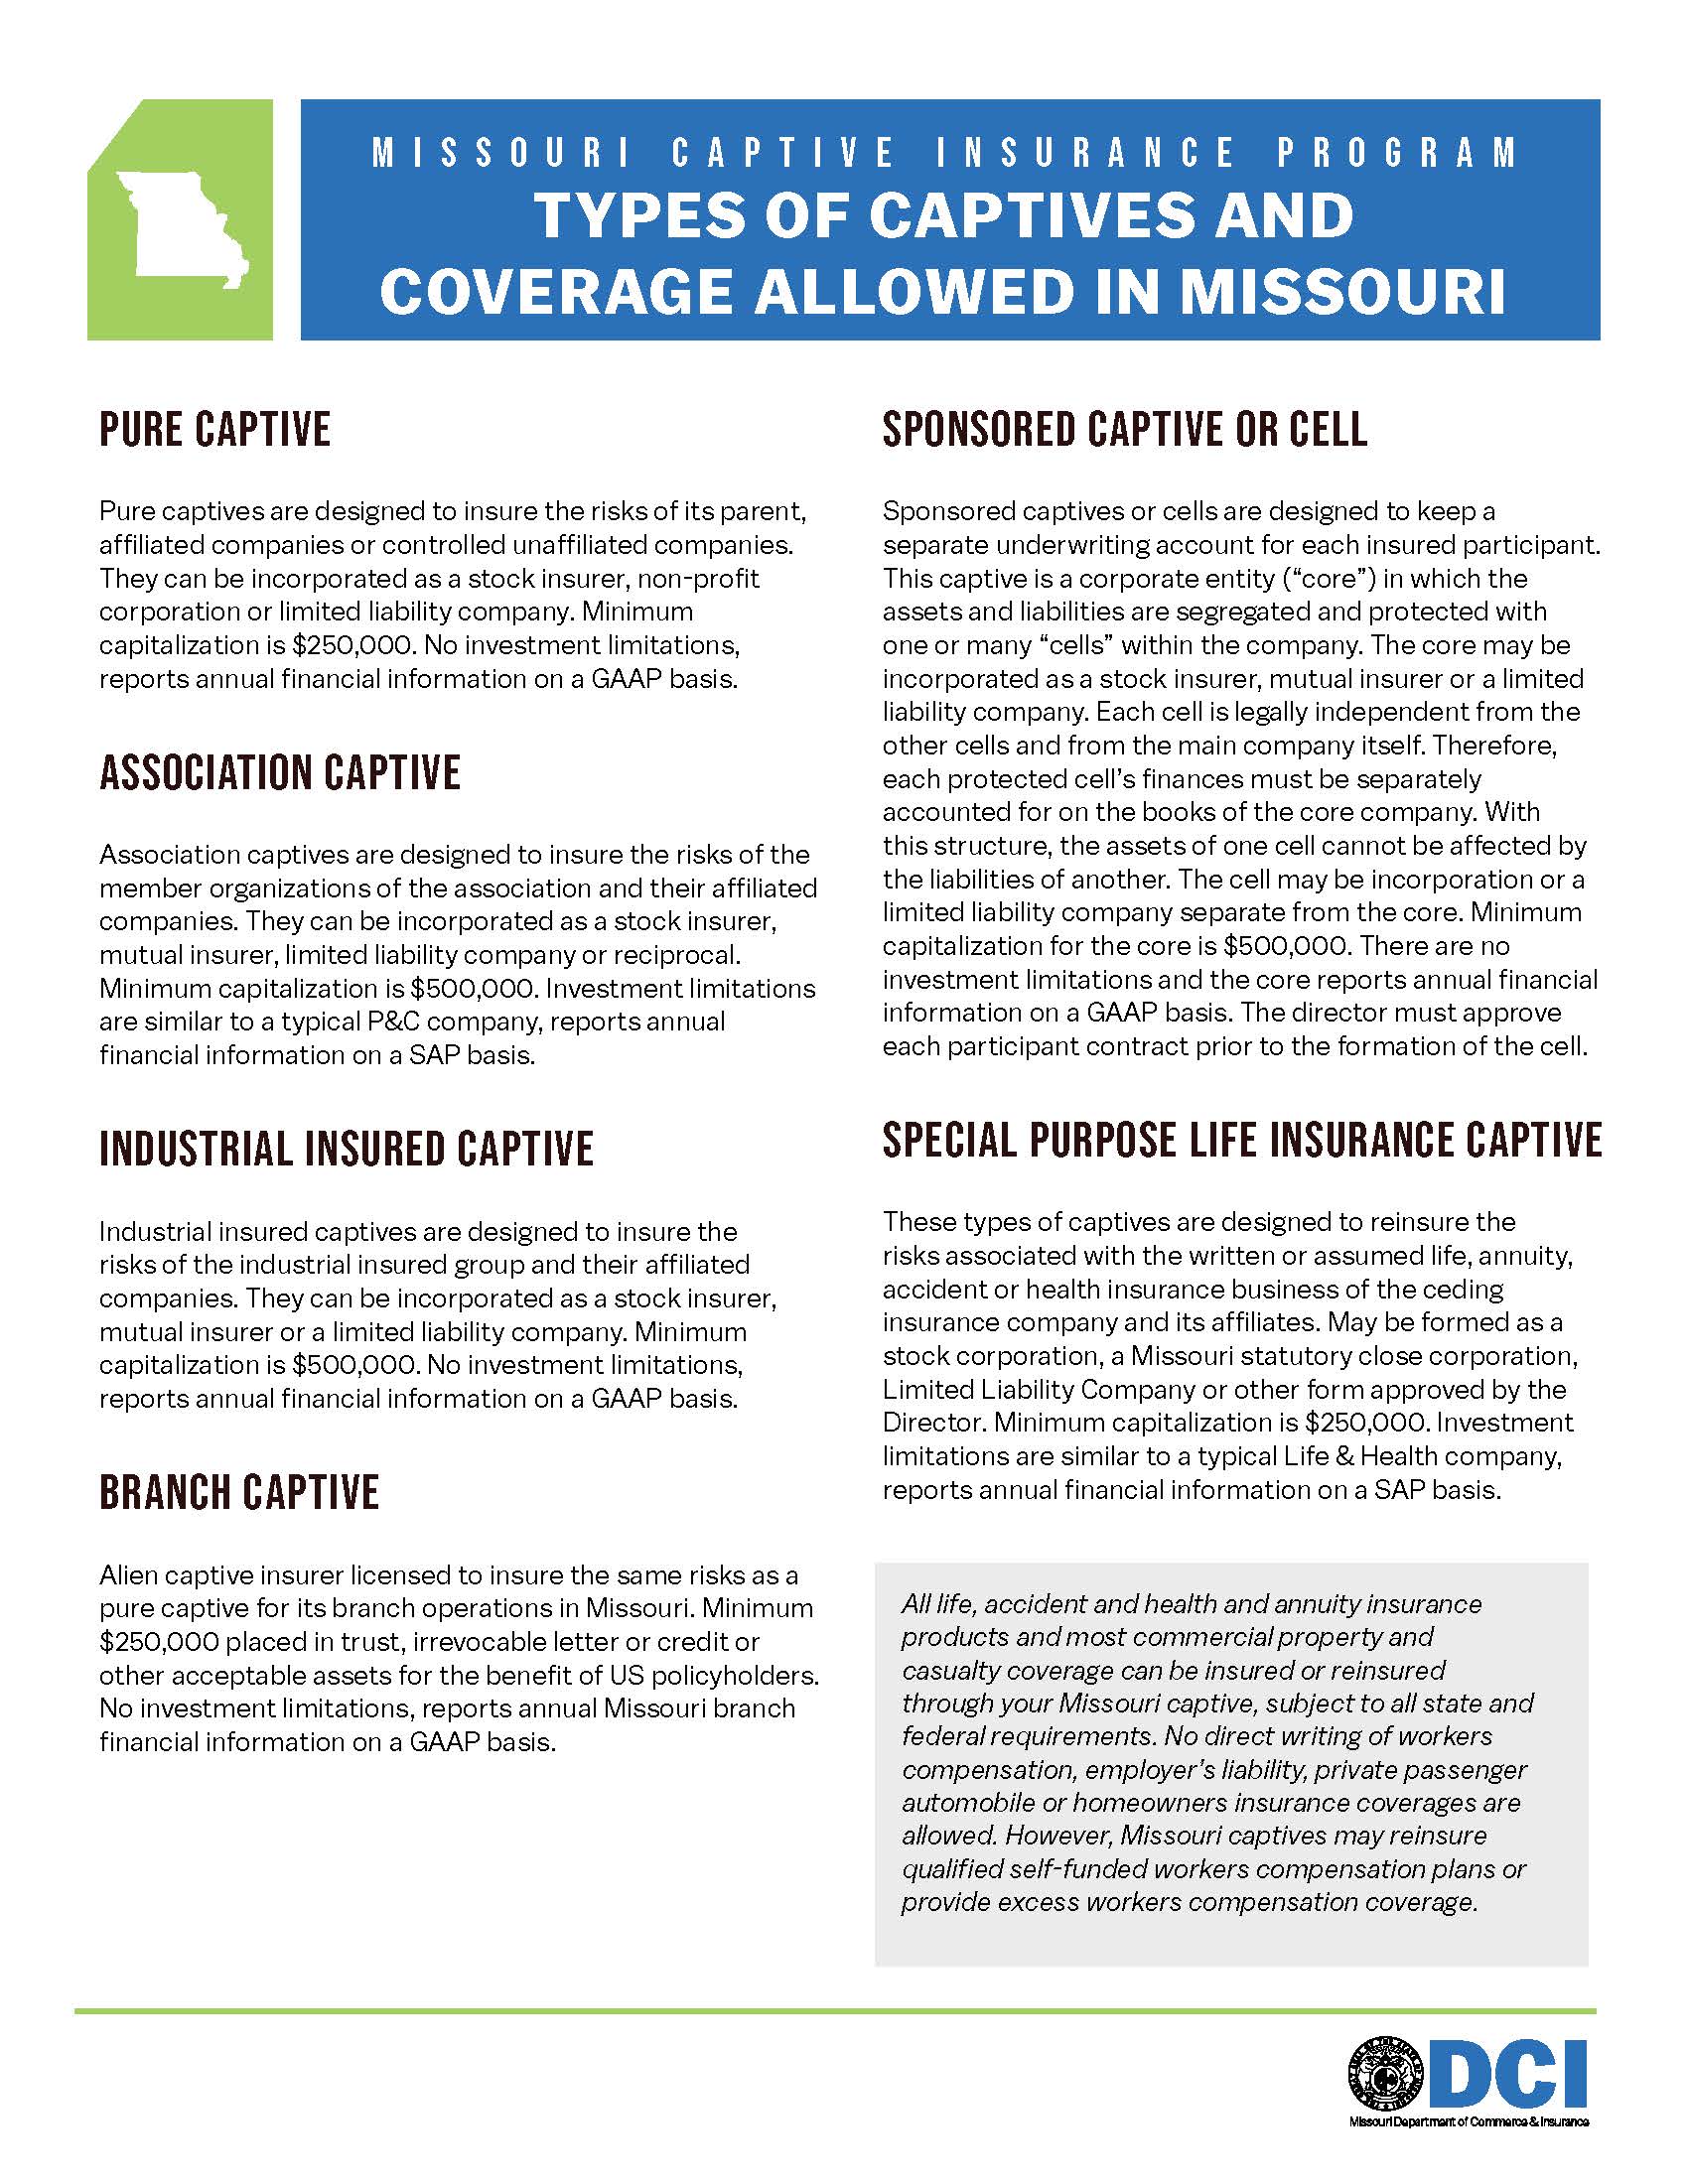 Types of captives and coverages allowed in Missouri